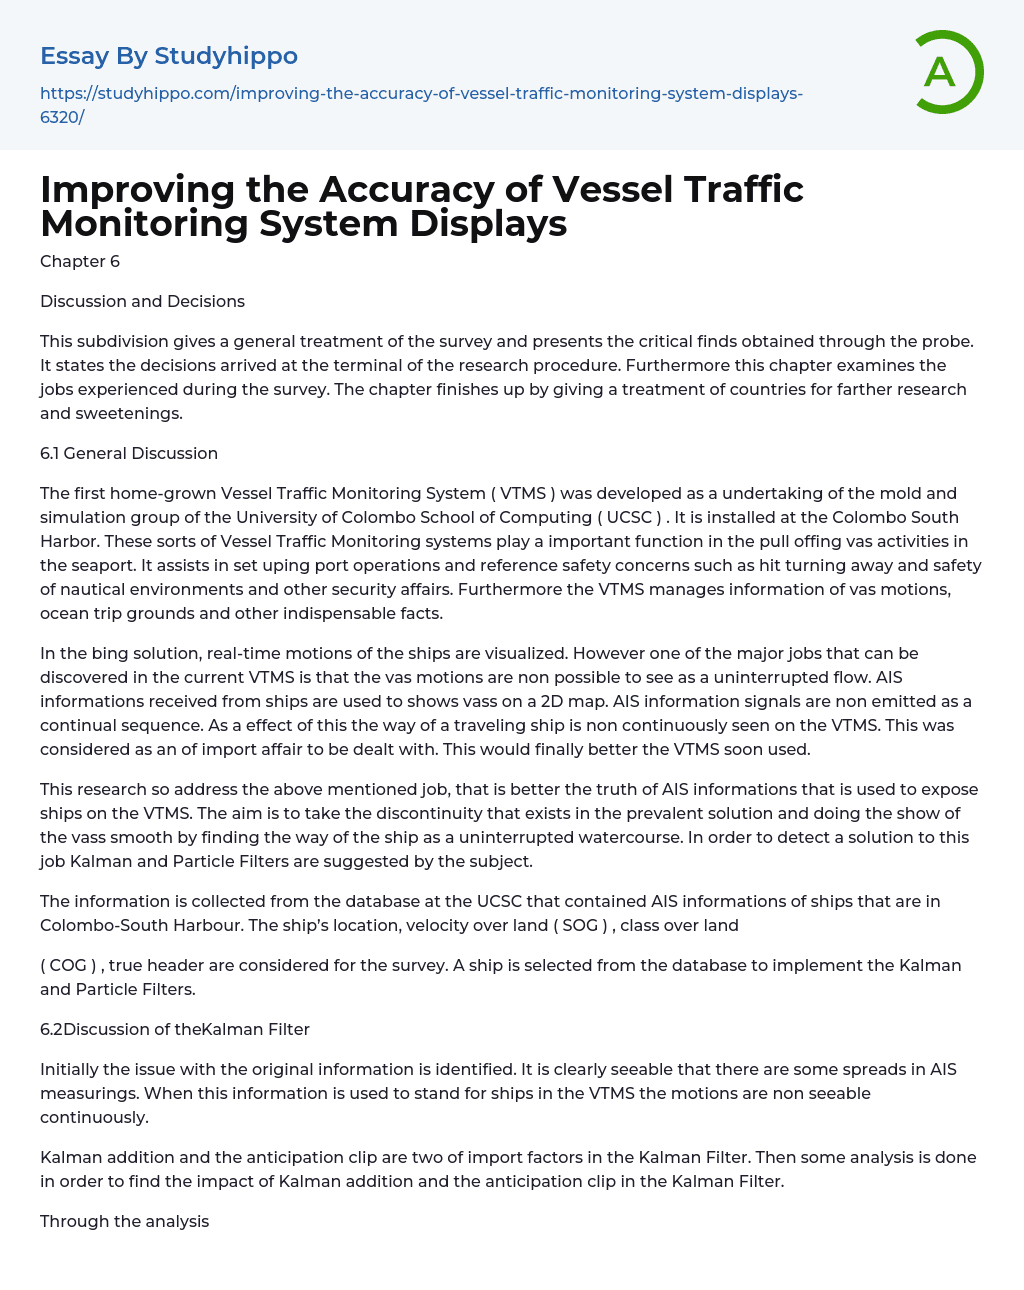 Improving the Accuracy of Vessel Traffic Monitoring System Displays Essay Example